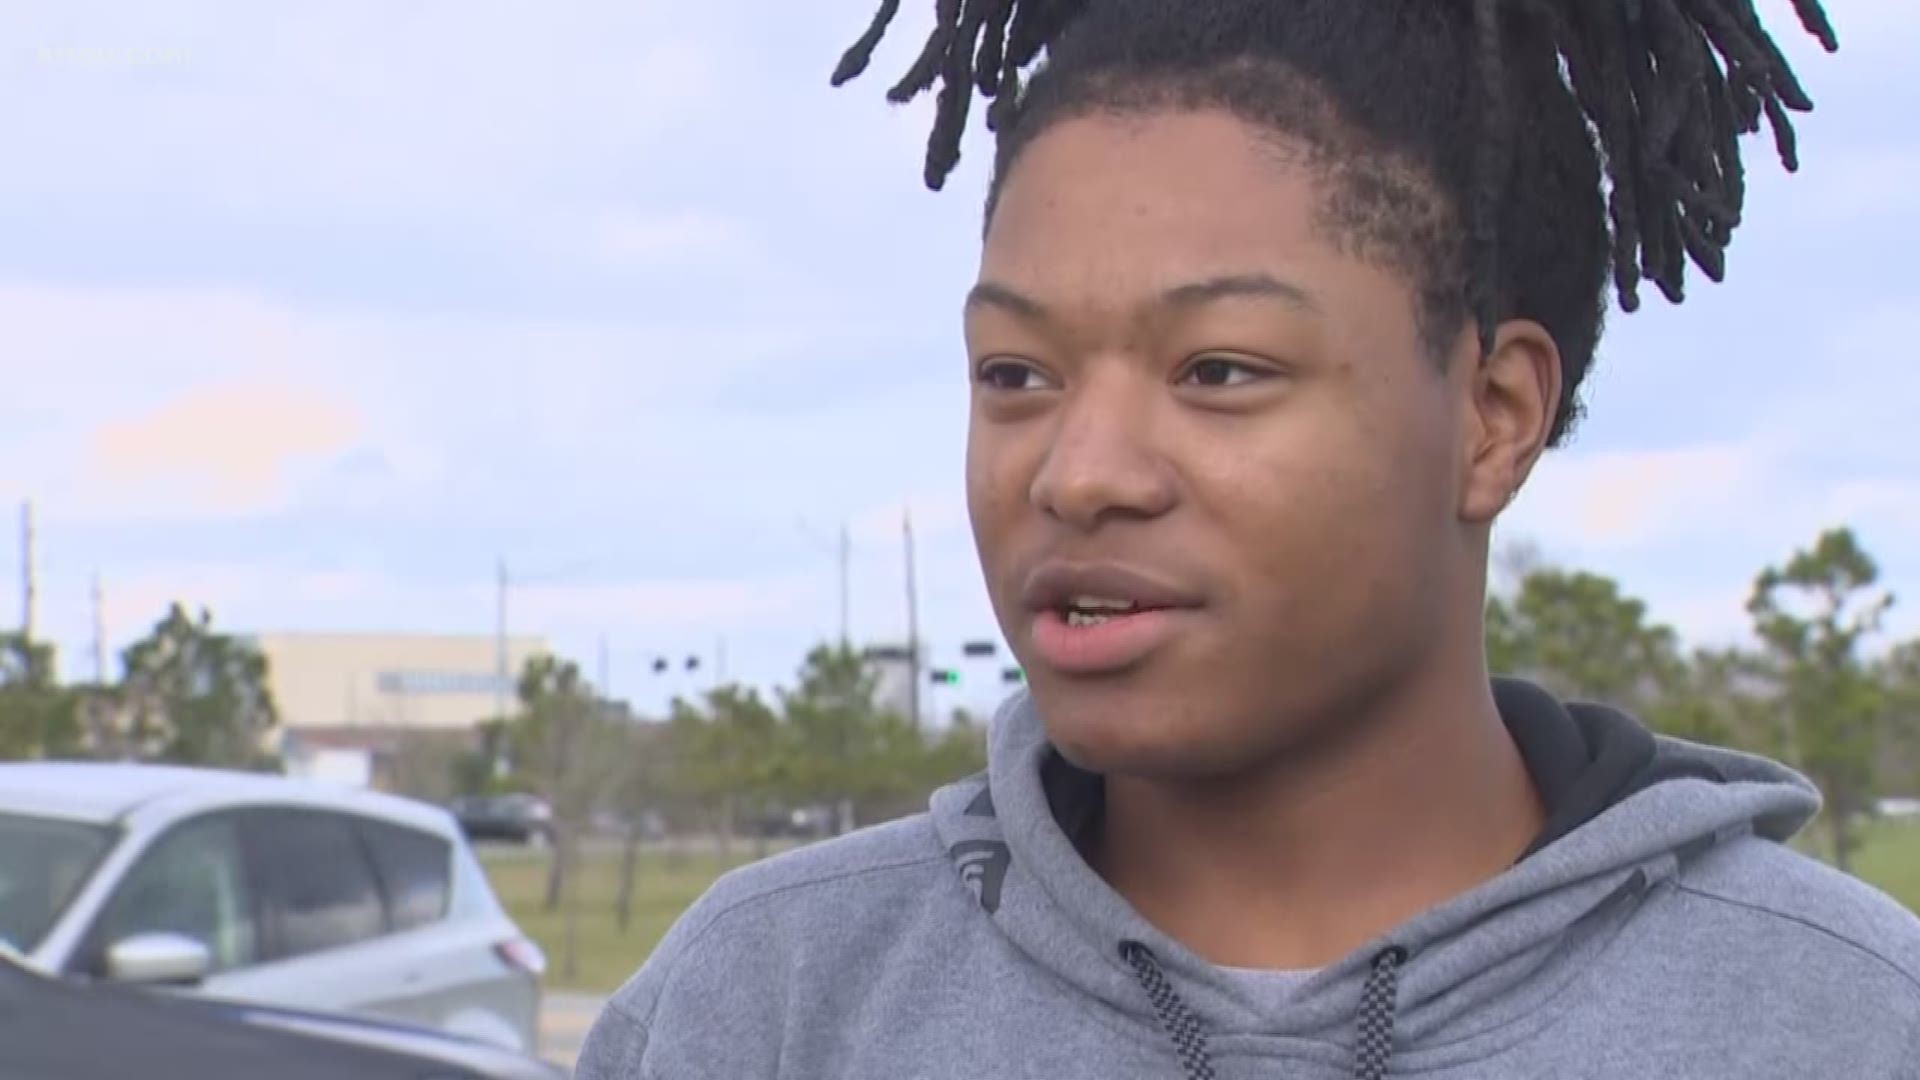 Court rules Texas student does not have to cut his locs 